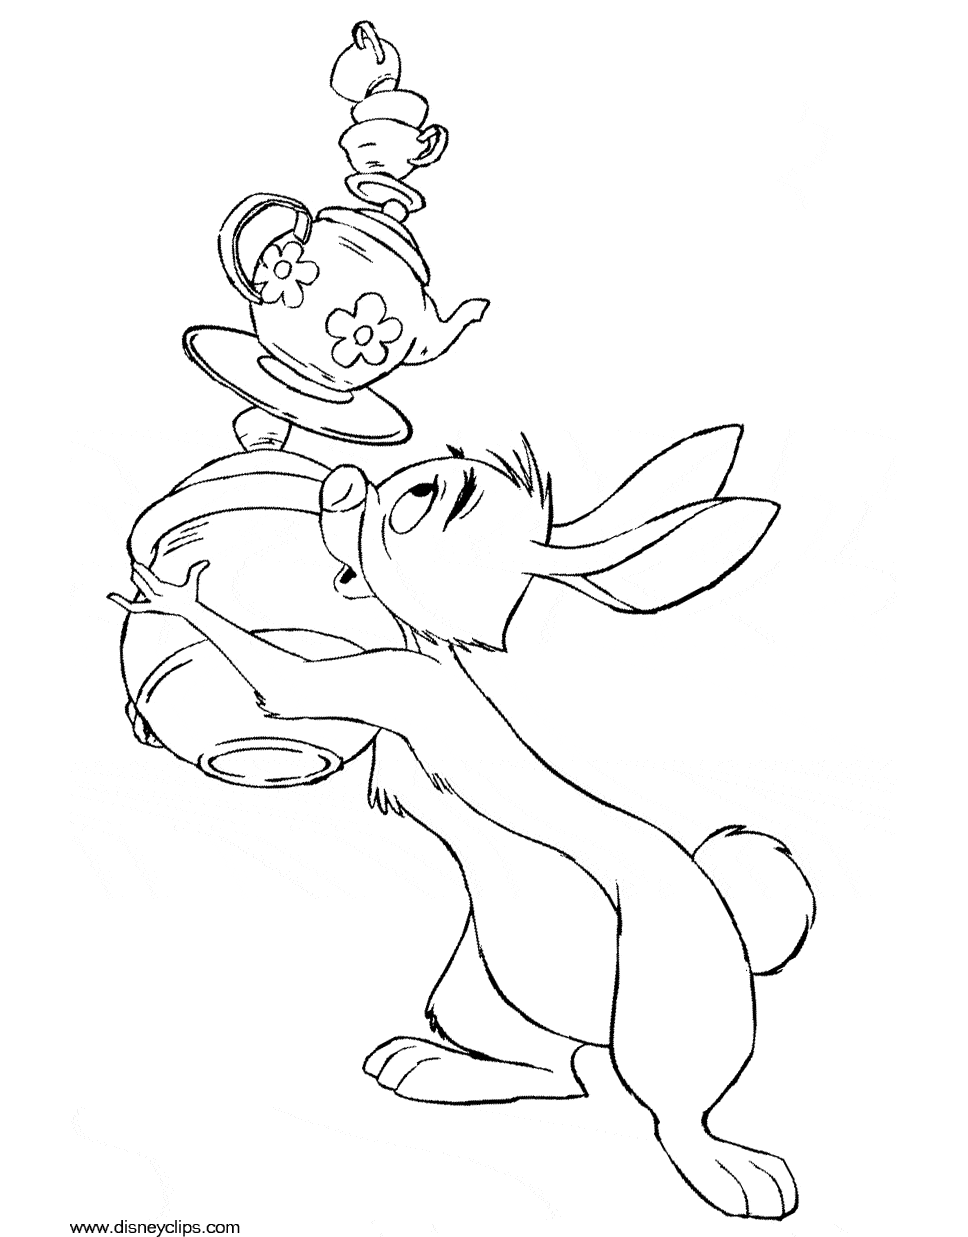 Winnie the Pooh  Friends Printable Coloring Page | Disney